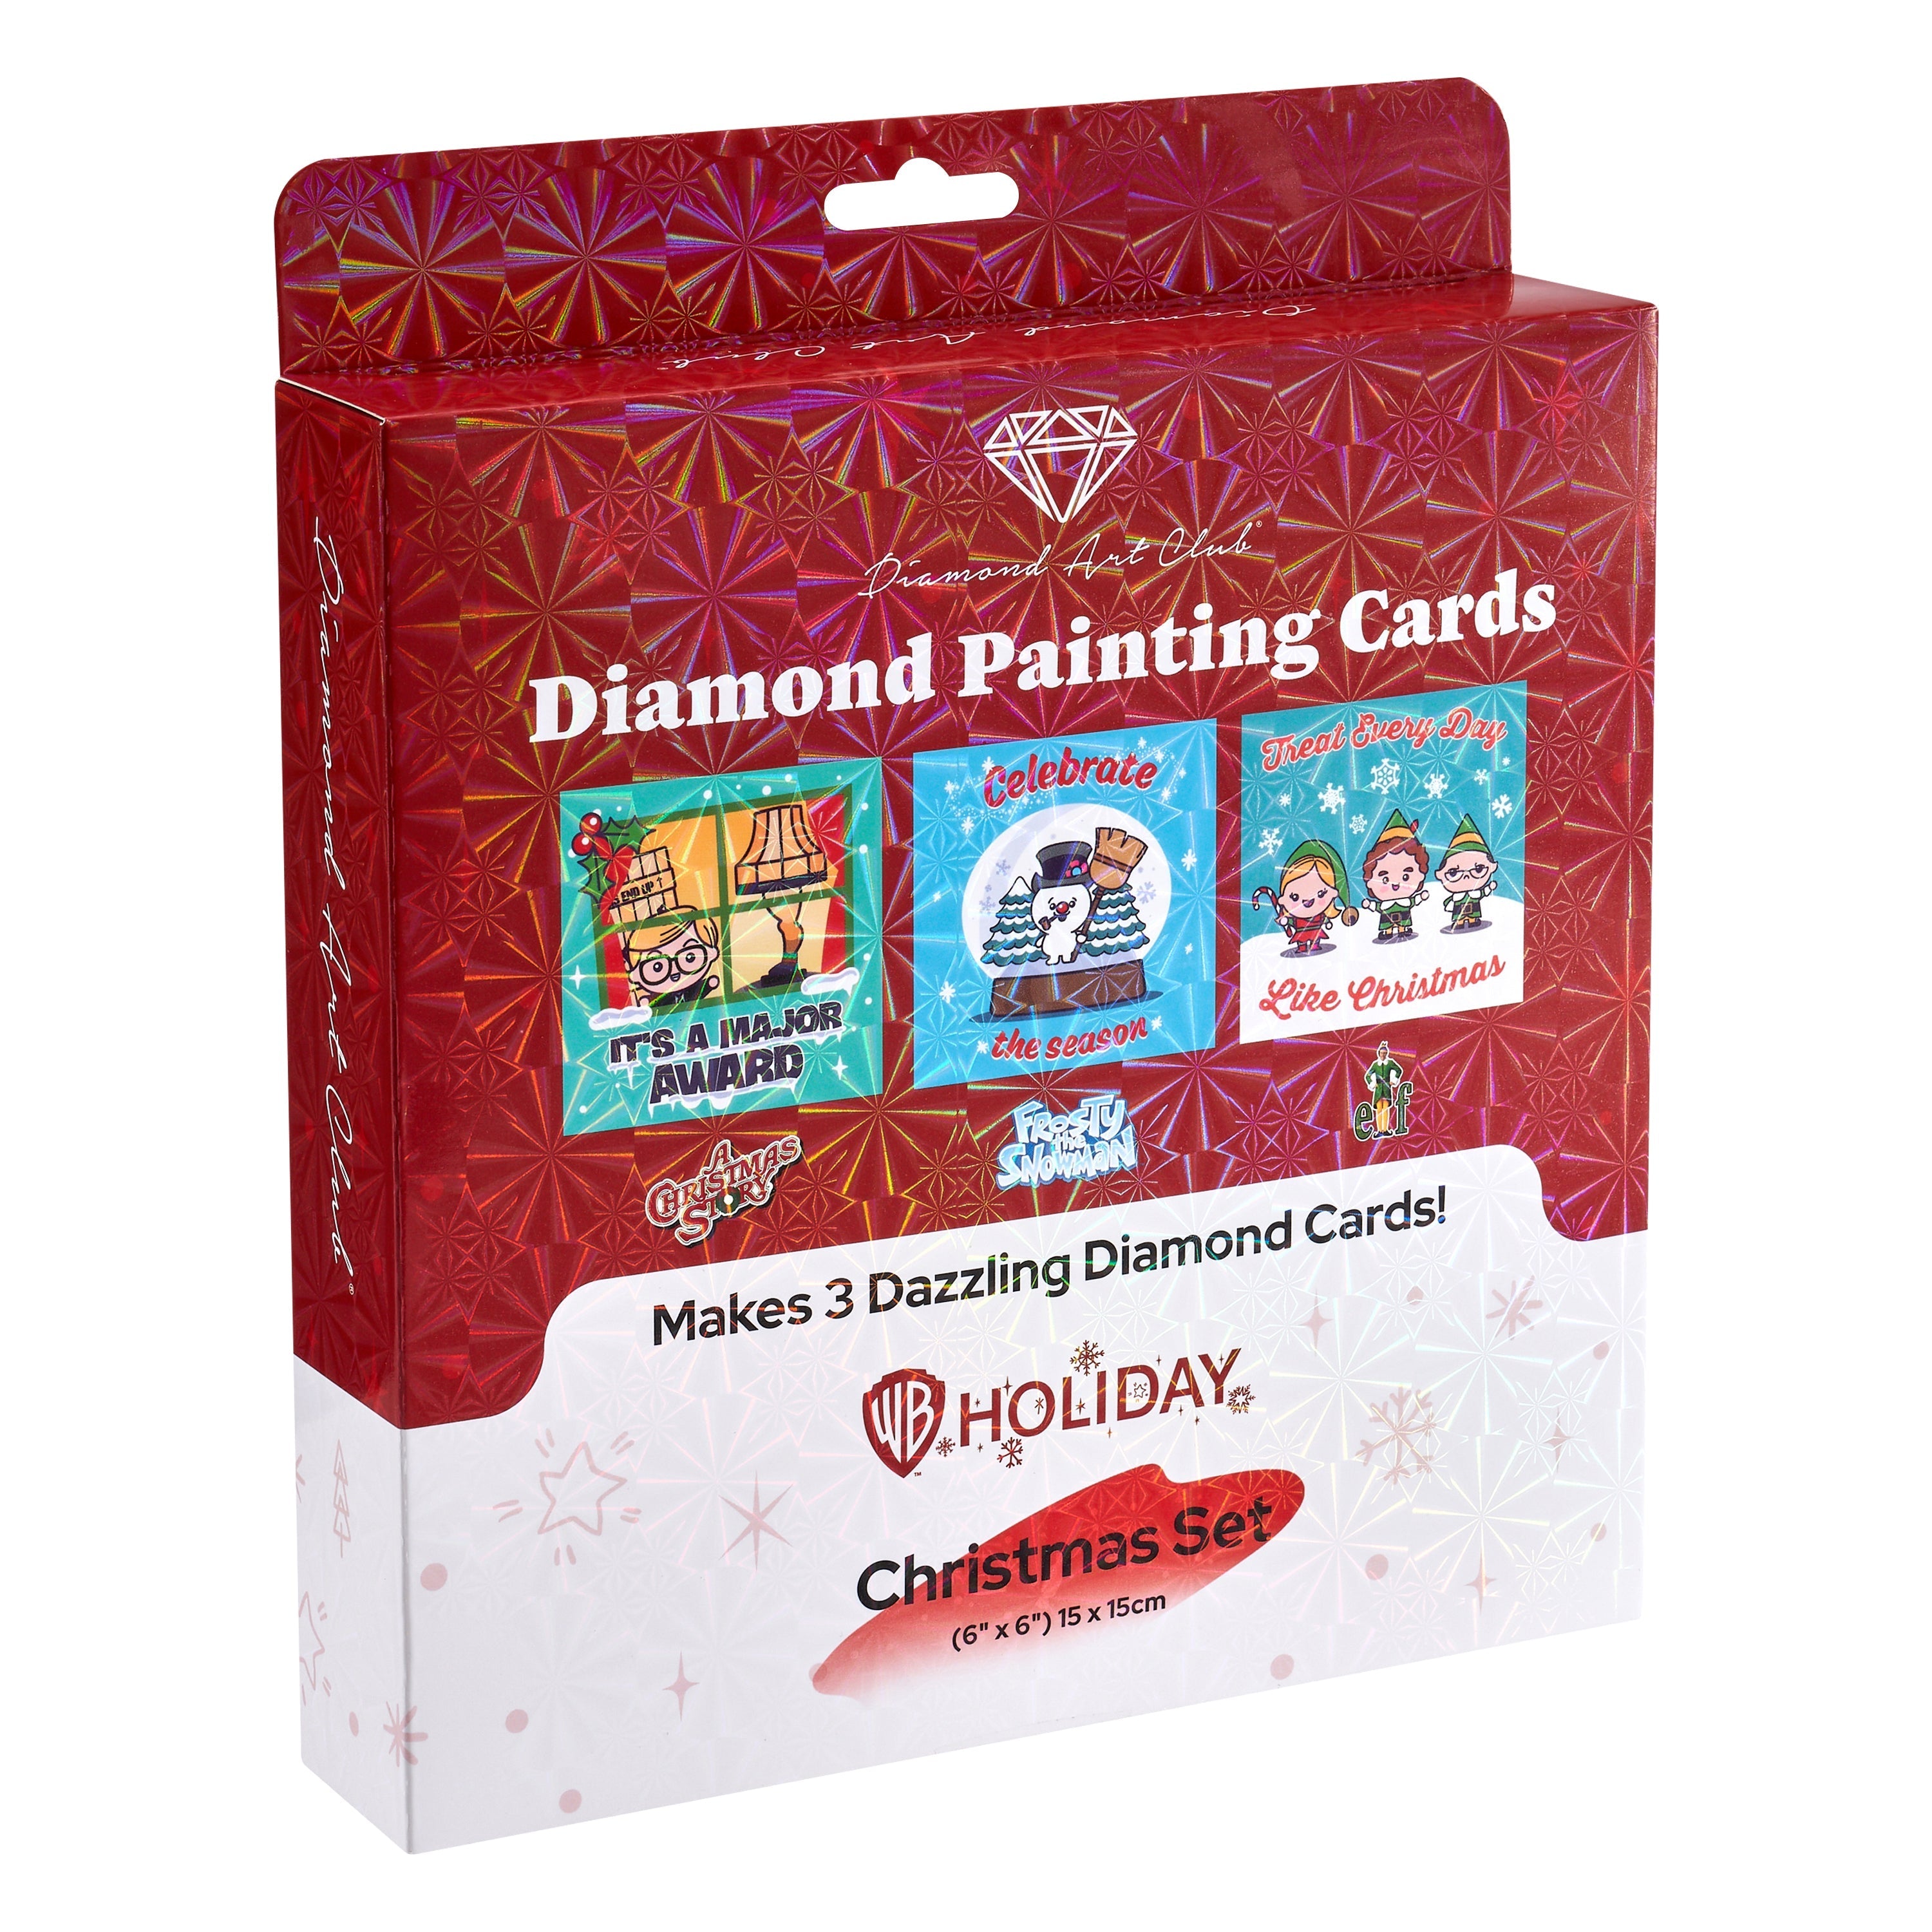 DAC Sneak Peek - Christmas Cards! Unboxing a festive 3-Pack of Diamond  Painting Cards 